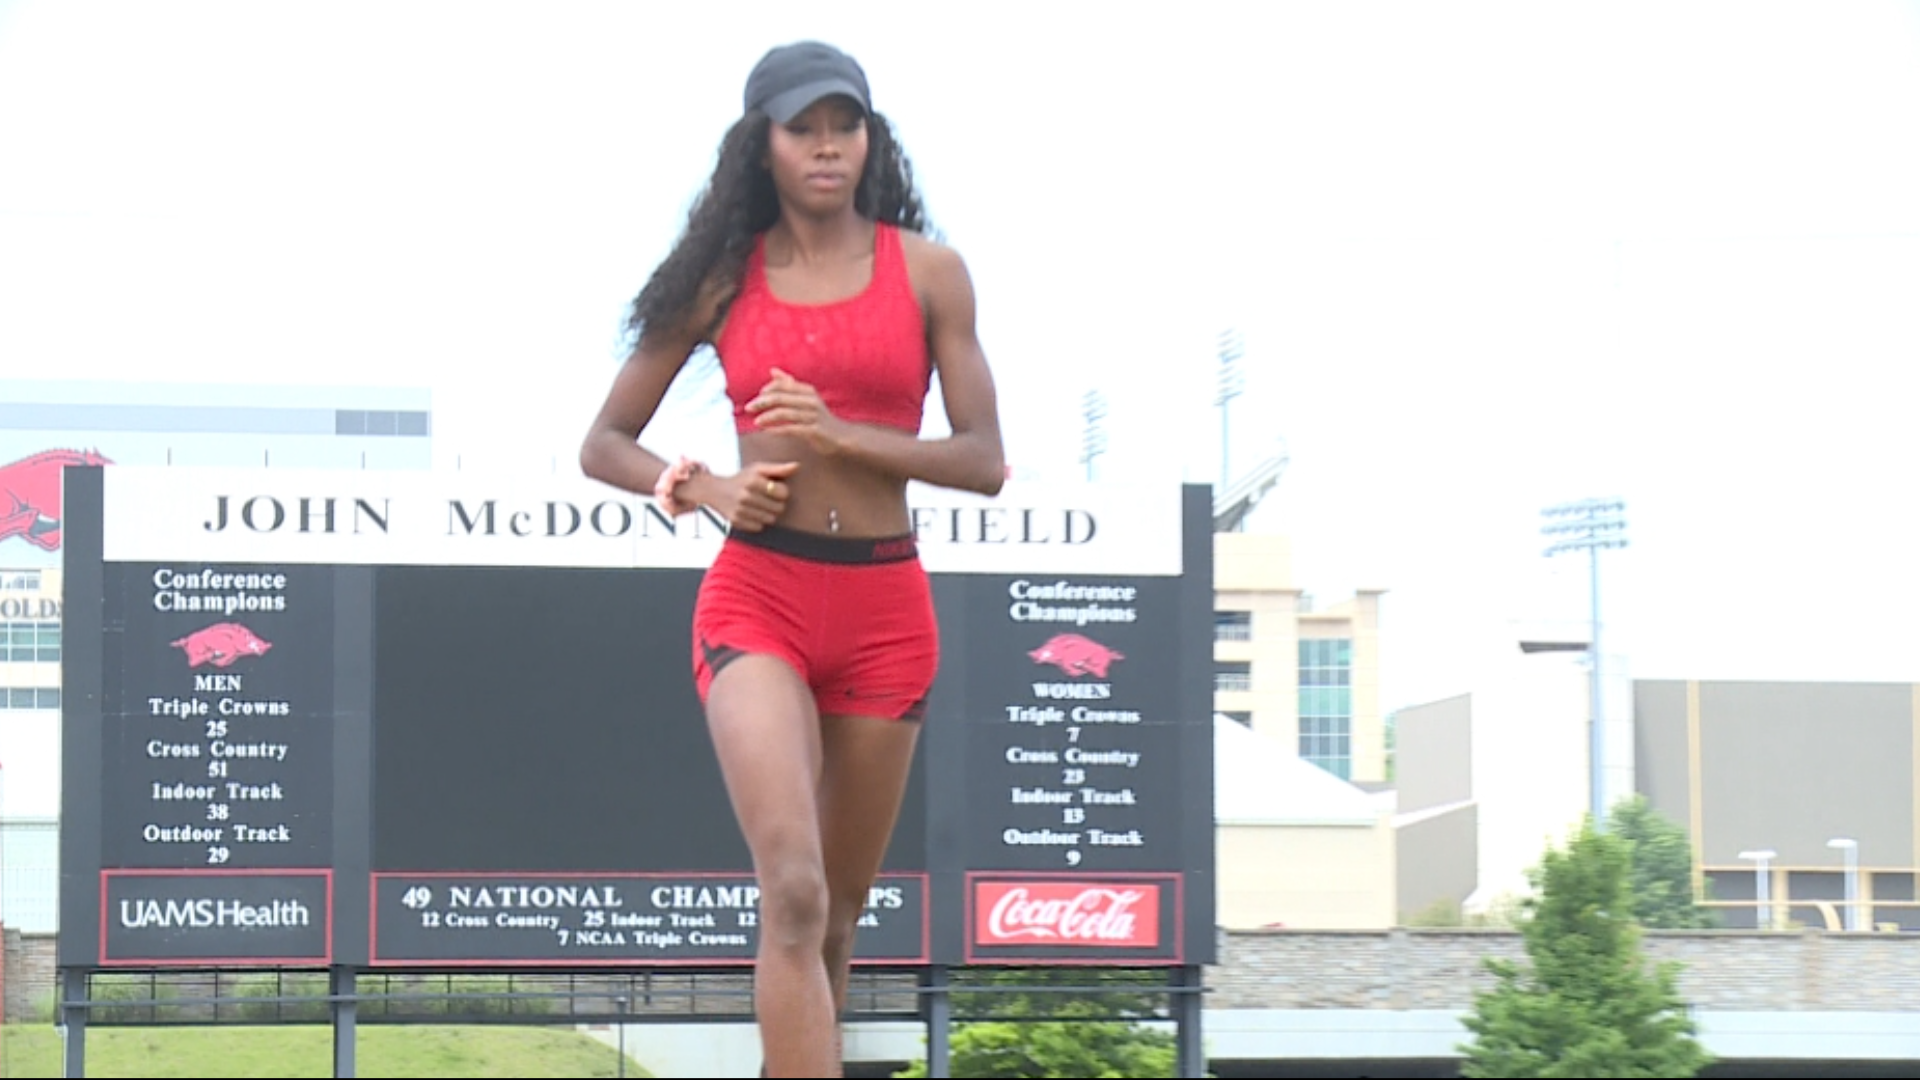 Arkansas track star Britton Wilson has made a habit of smashing records this season. She looks to add to her legacy in Austin, attempting a historic double.